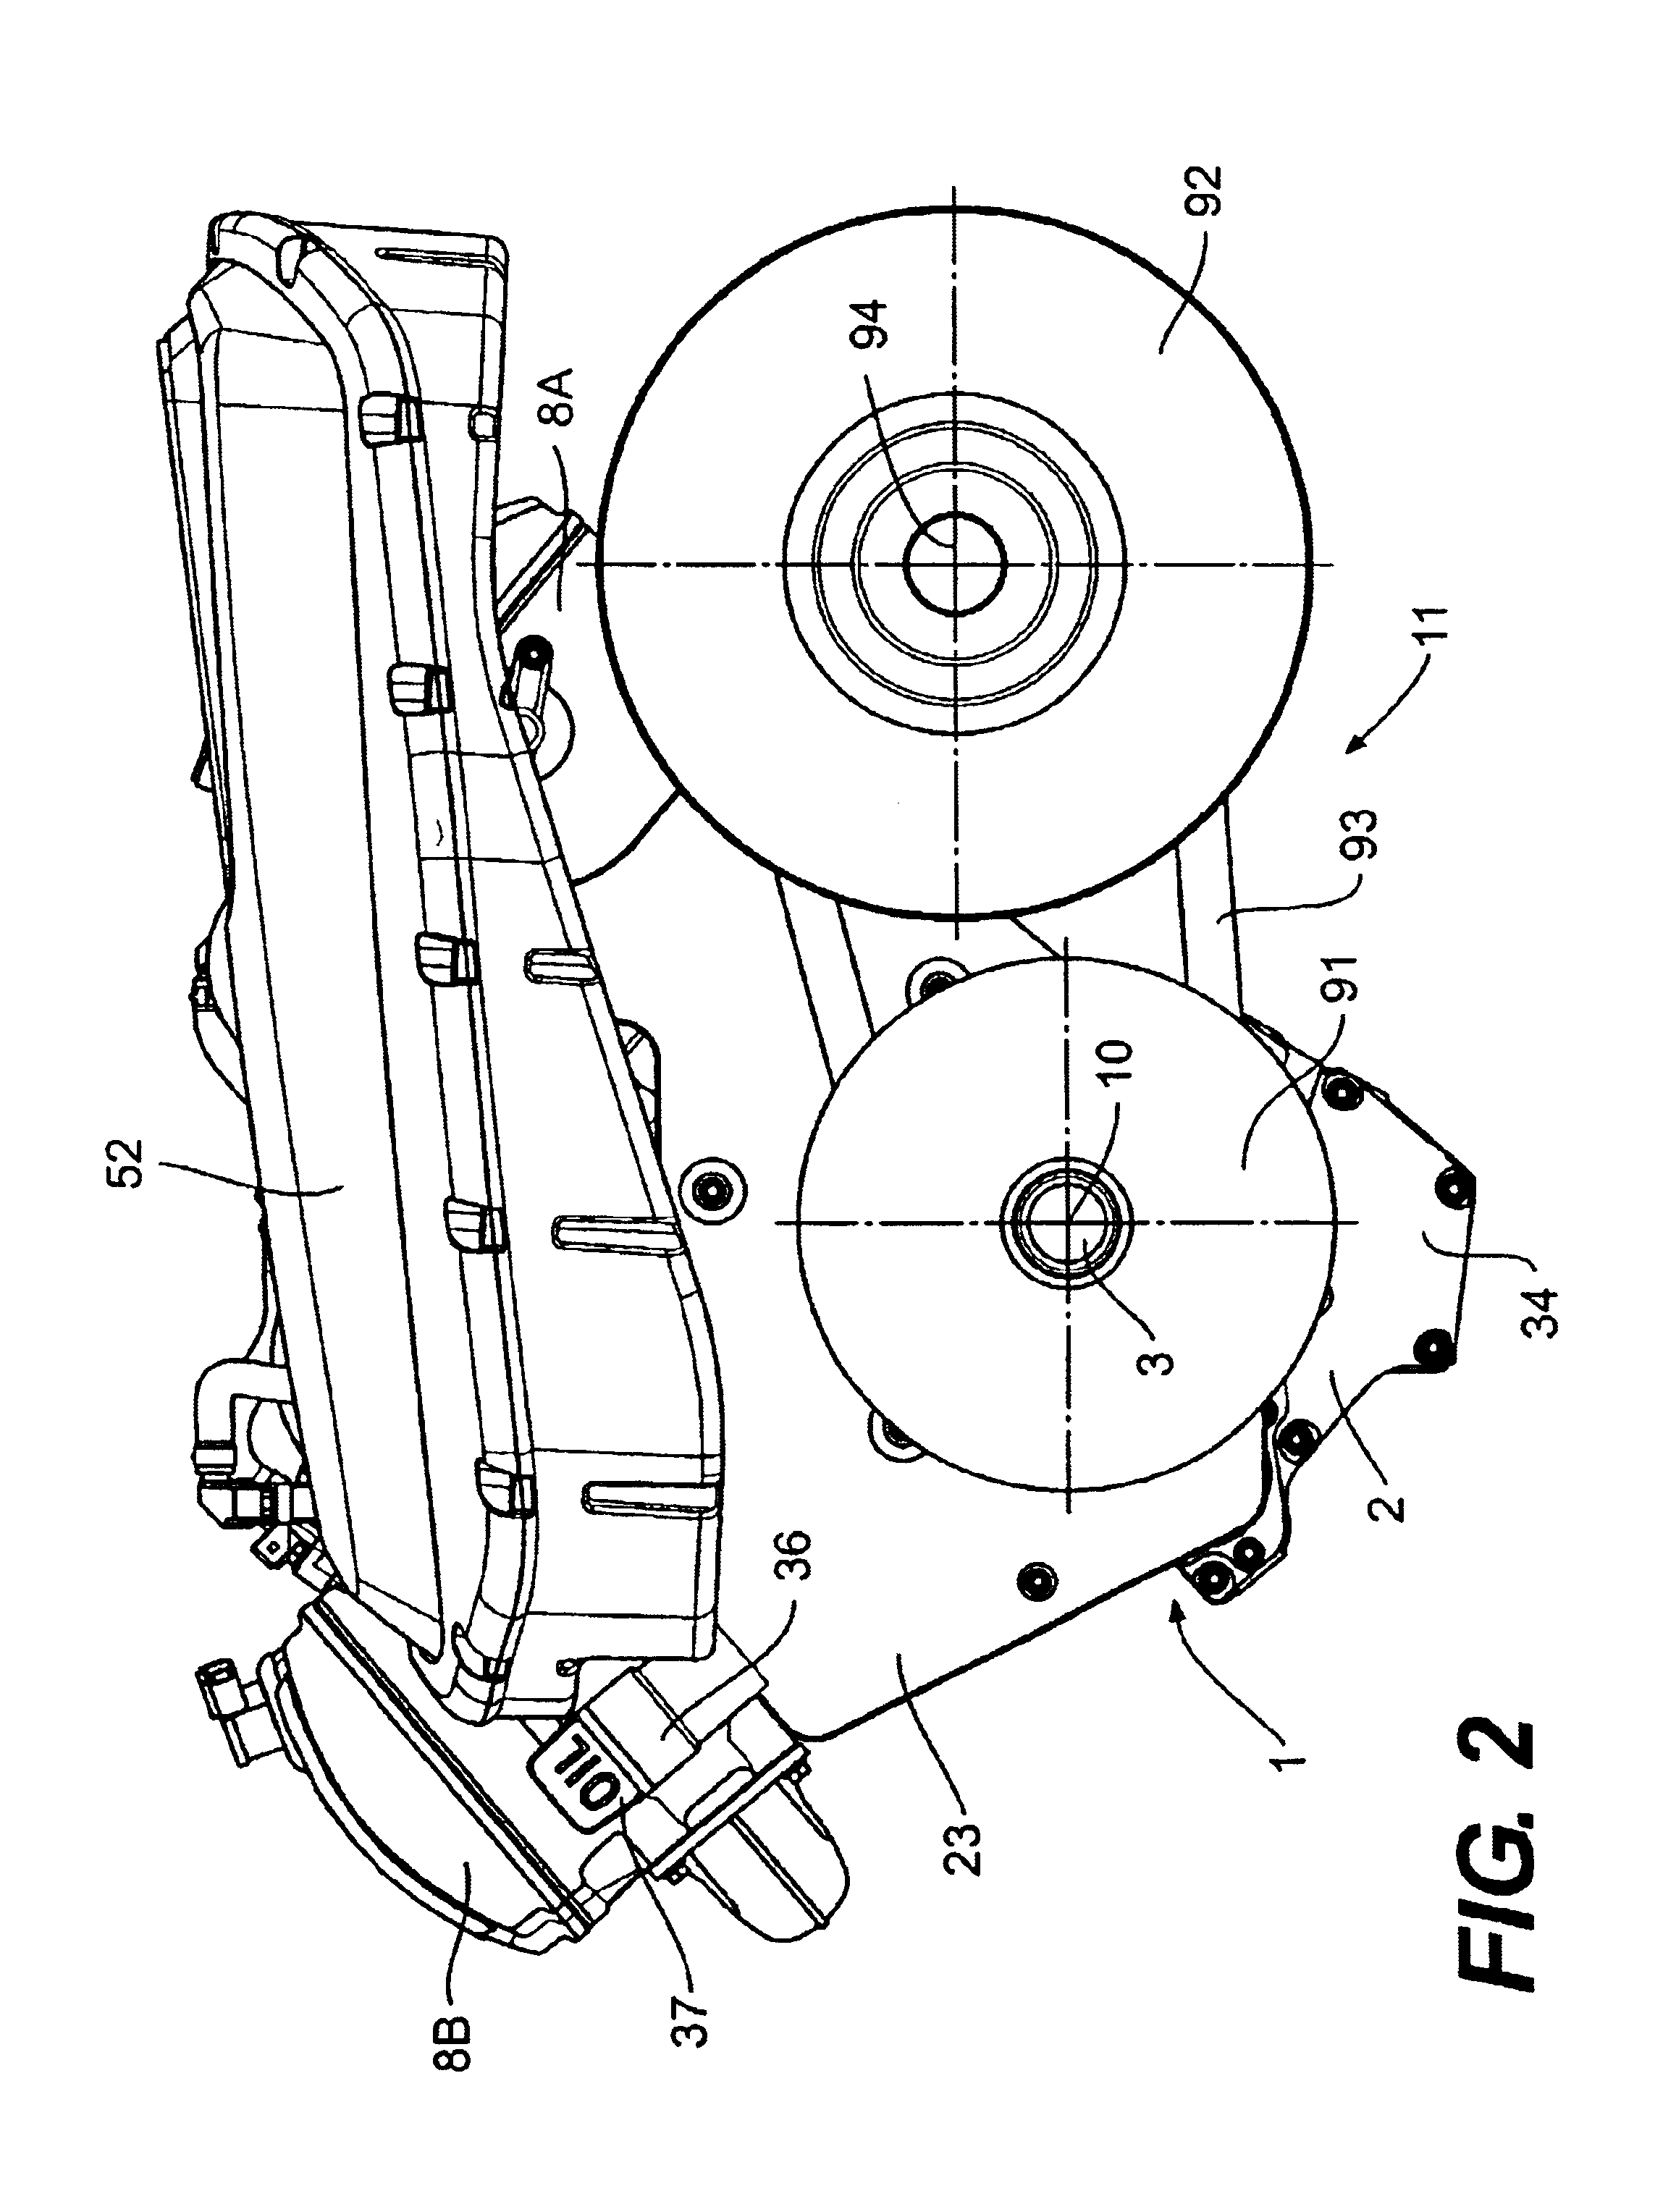 Lubrication system for a four cycle engine